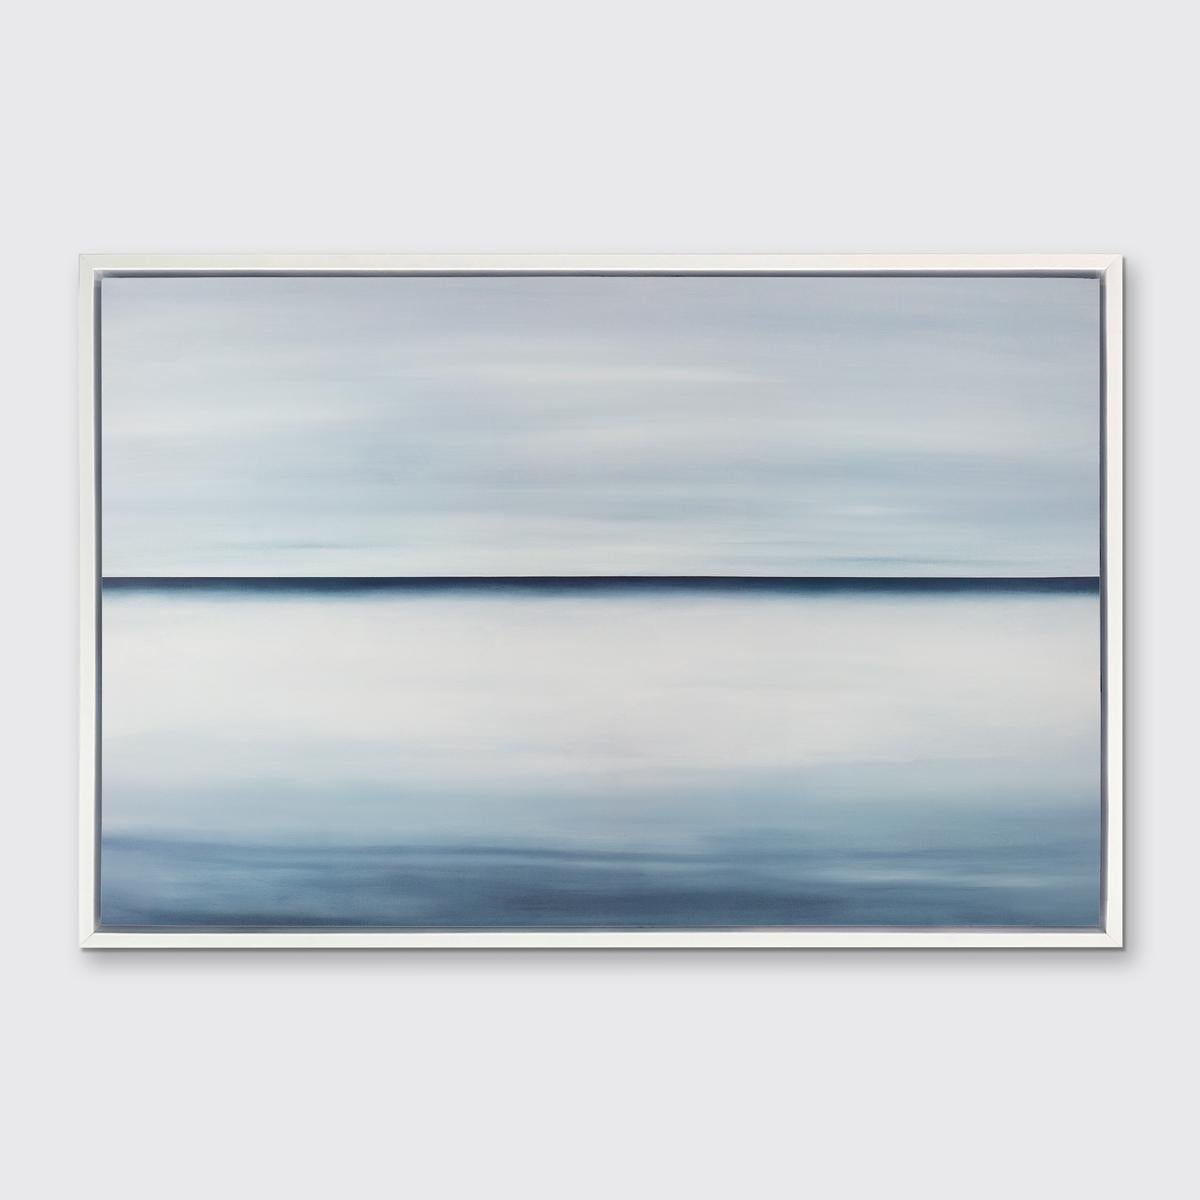 Tony Iadicicco Abstract Print - "Open Water" Framed Limited Edition Giclee Print, 48" x 72"